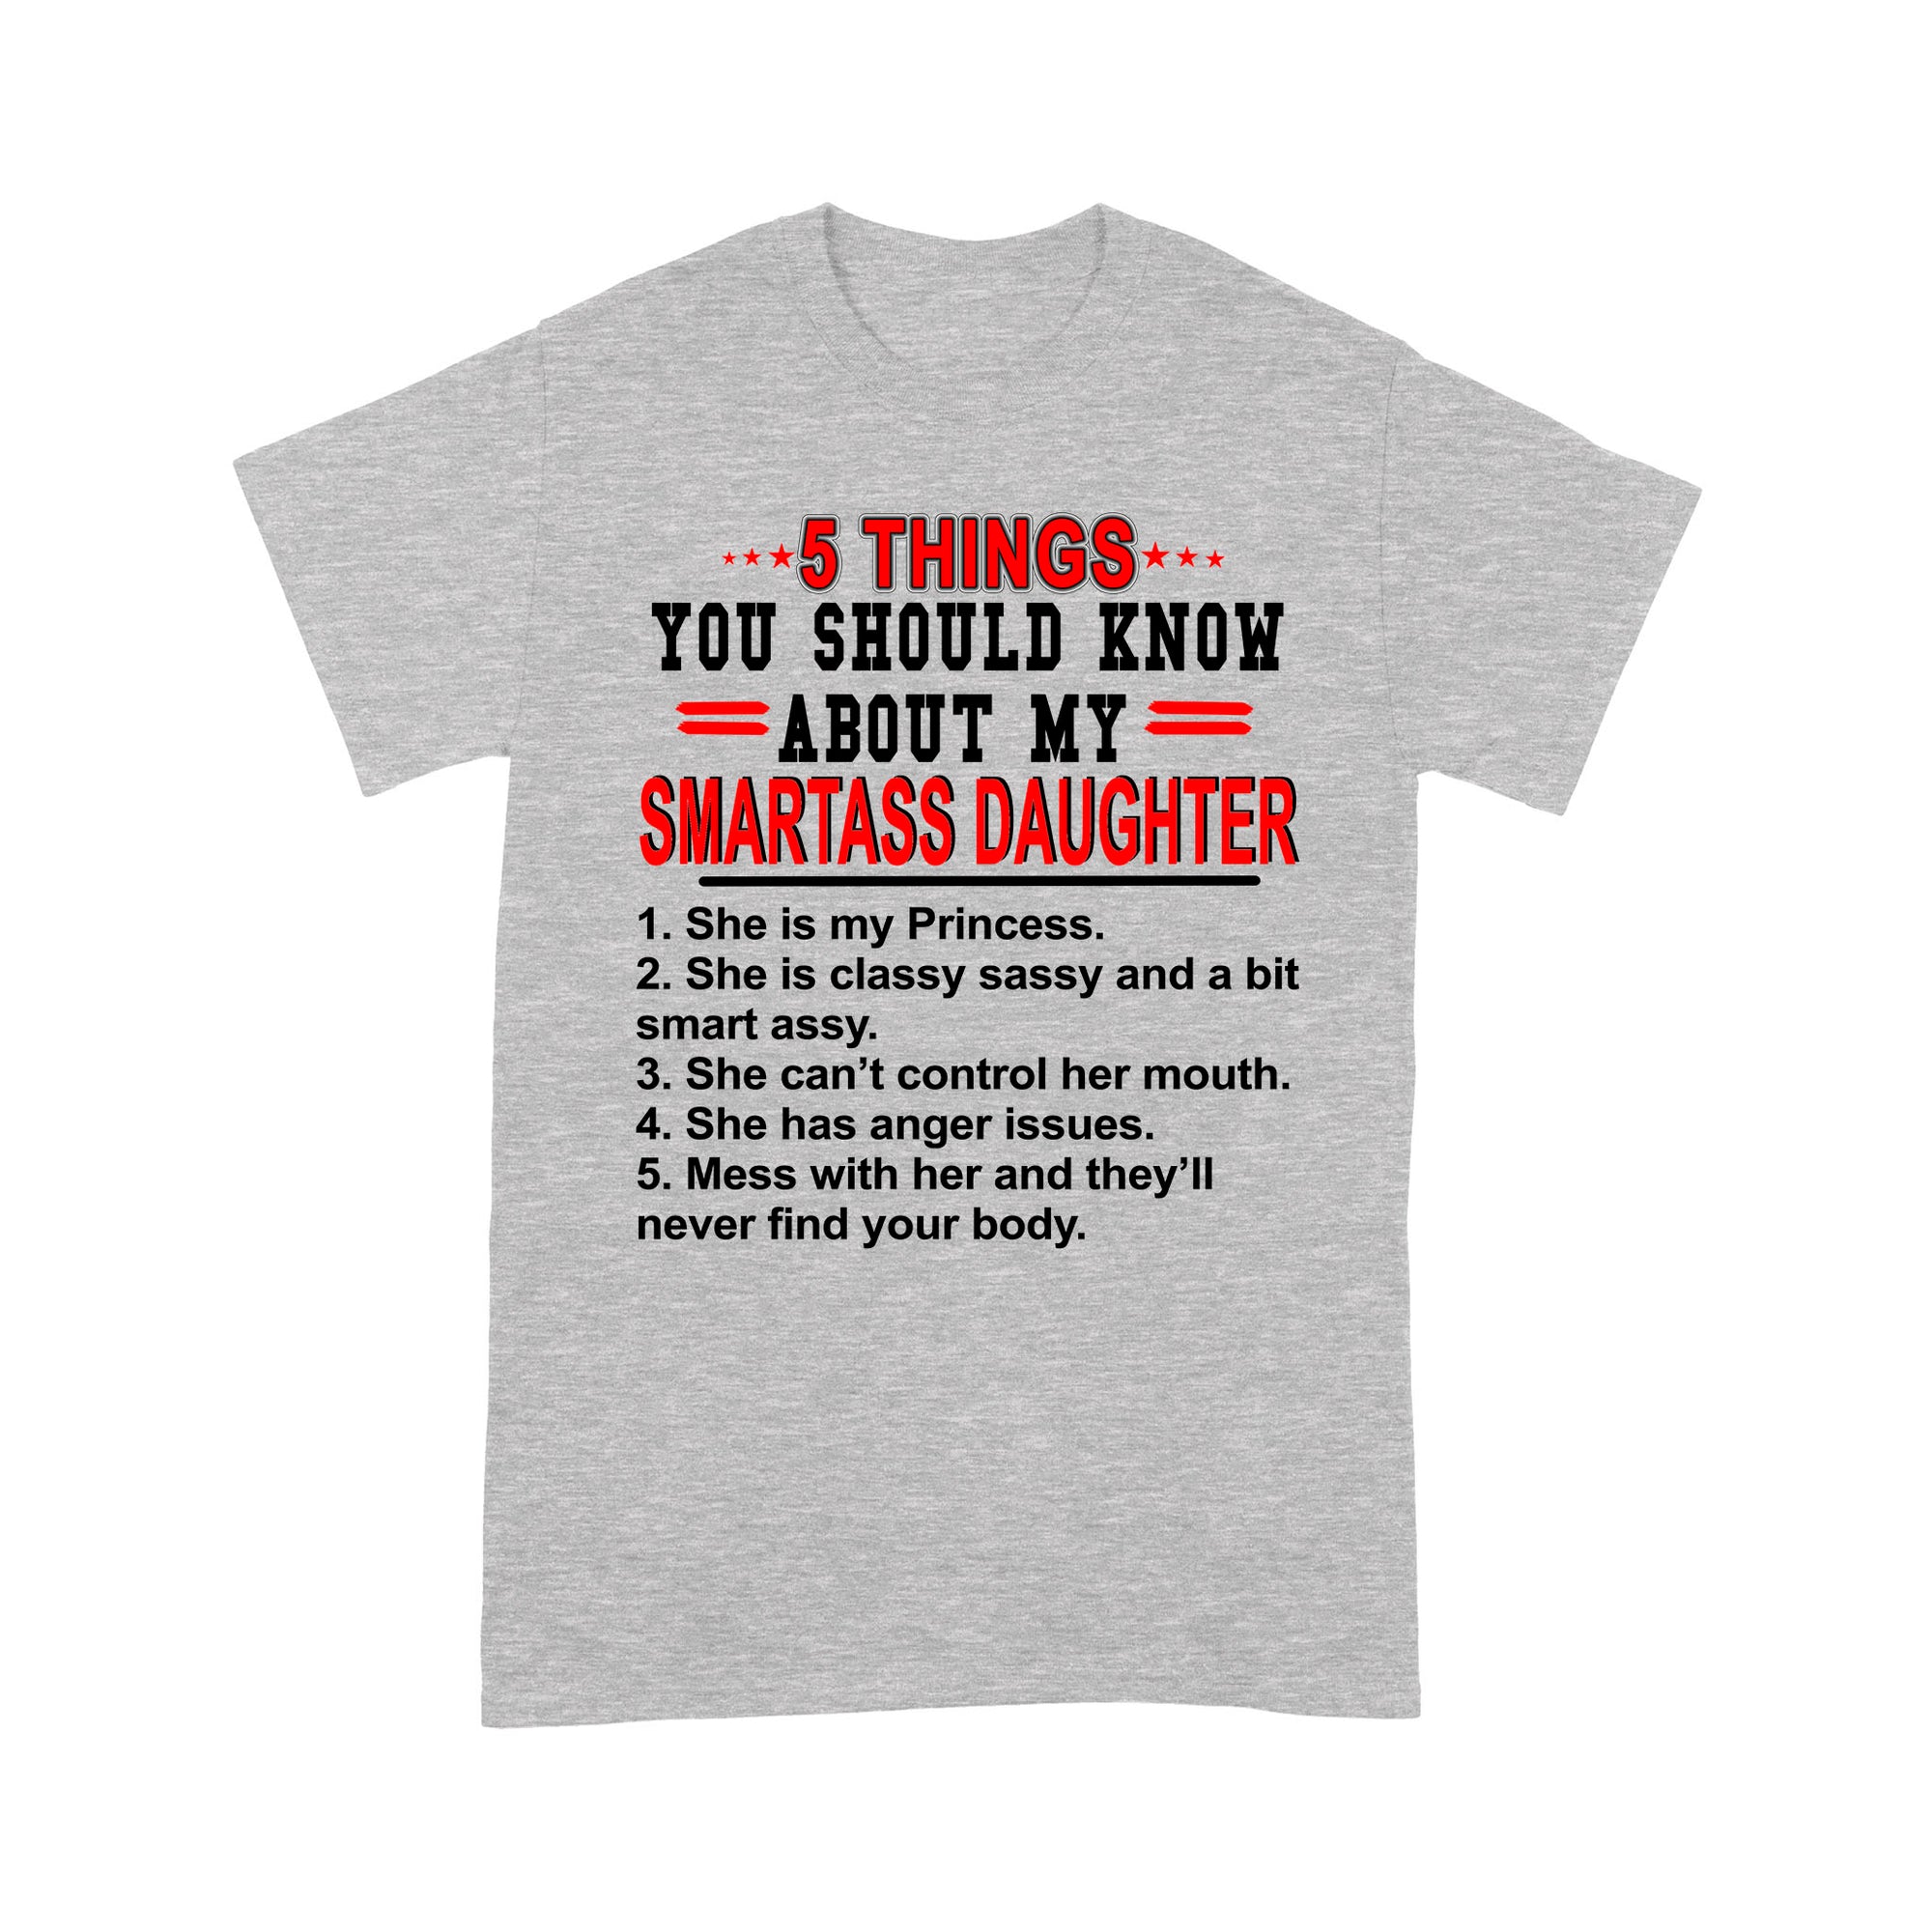 Gift Ideas for Dad 5 Things You Should Know About My Smartass Daughter - Standard T-shirt